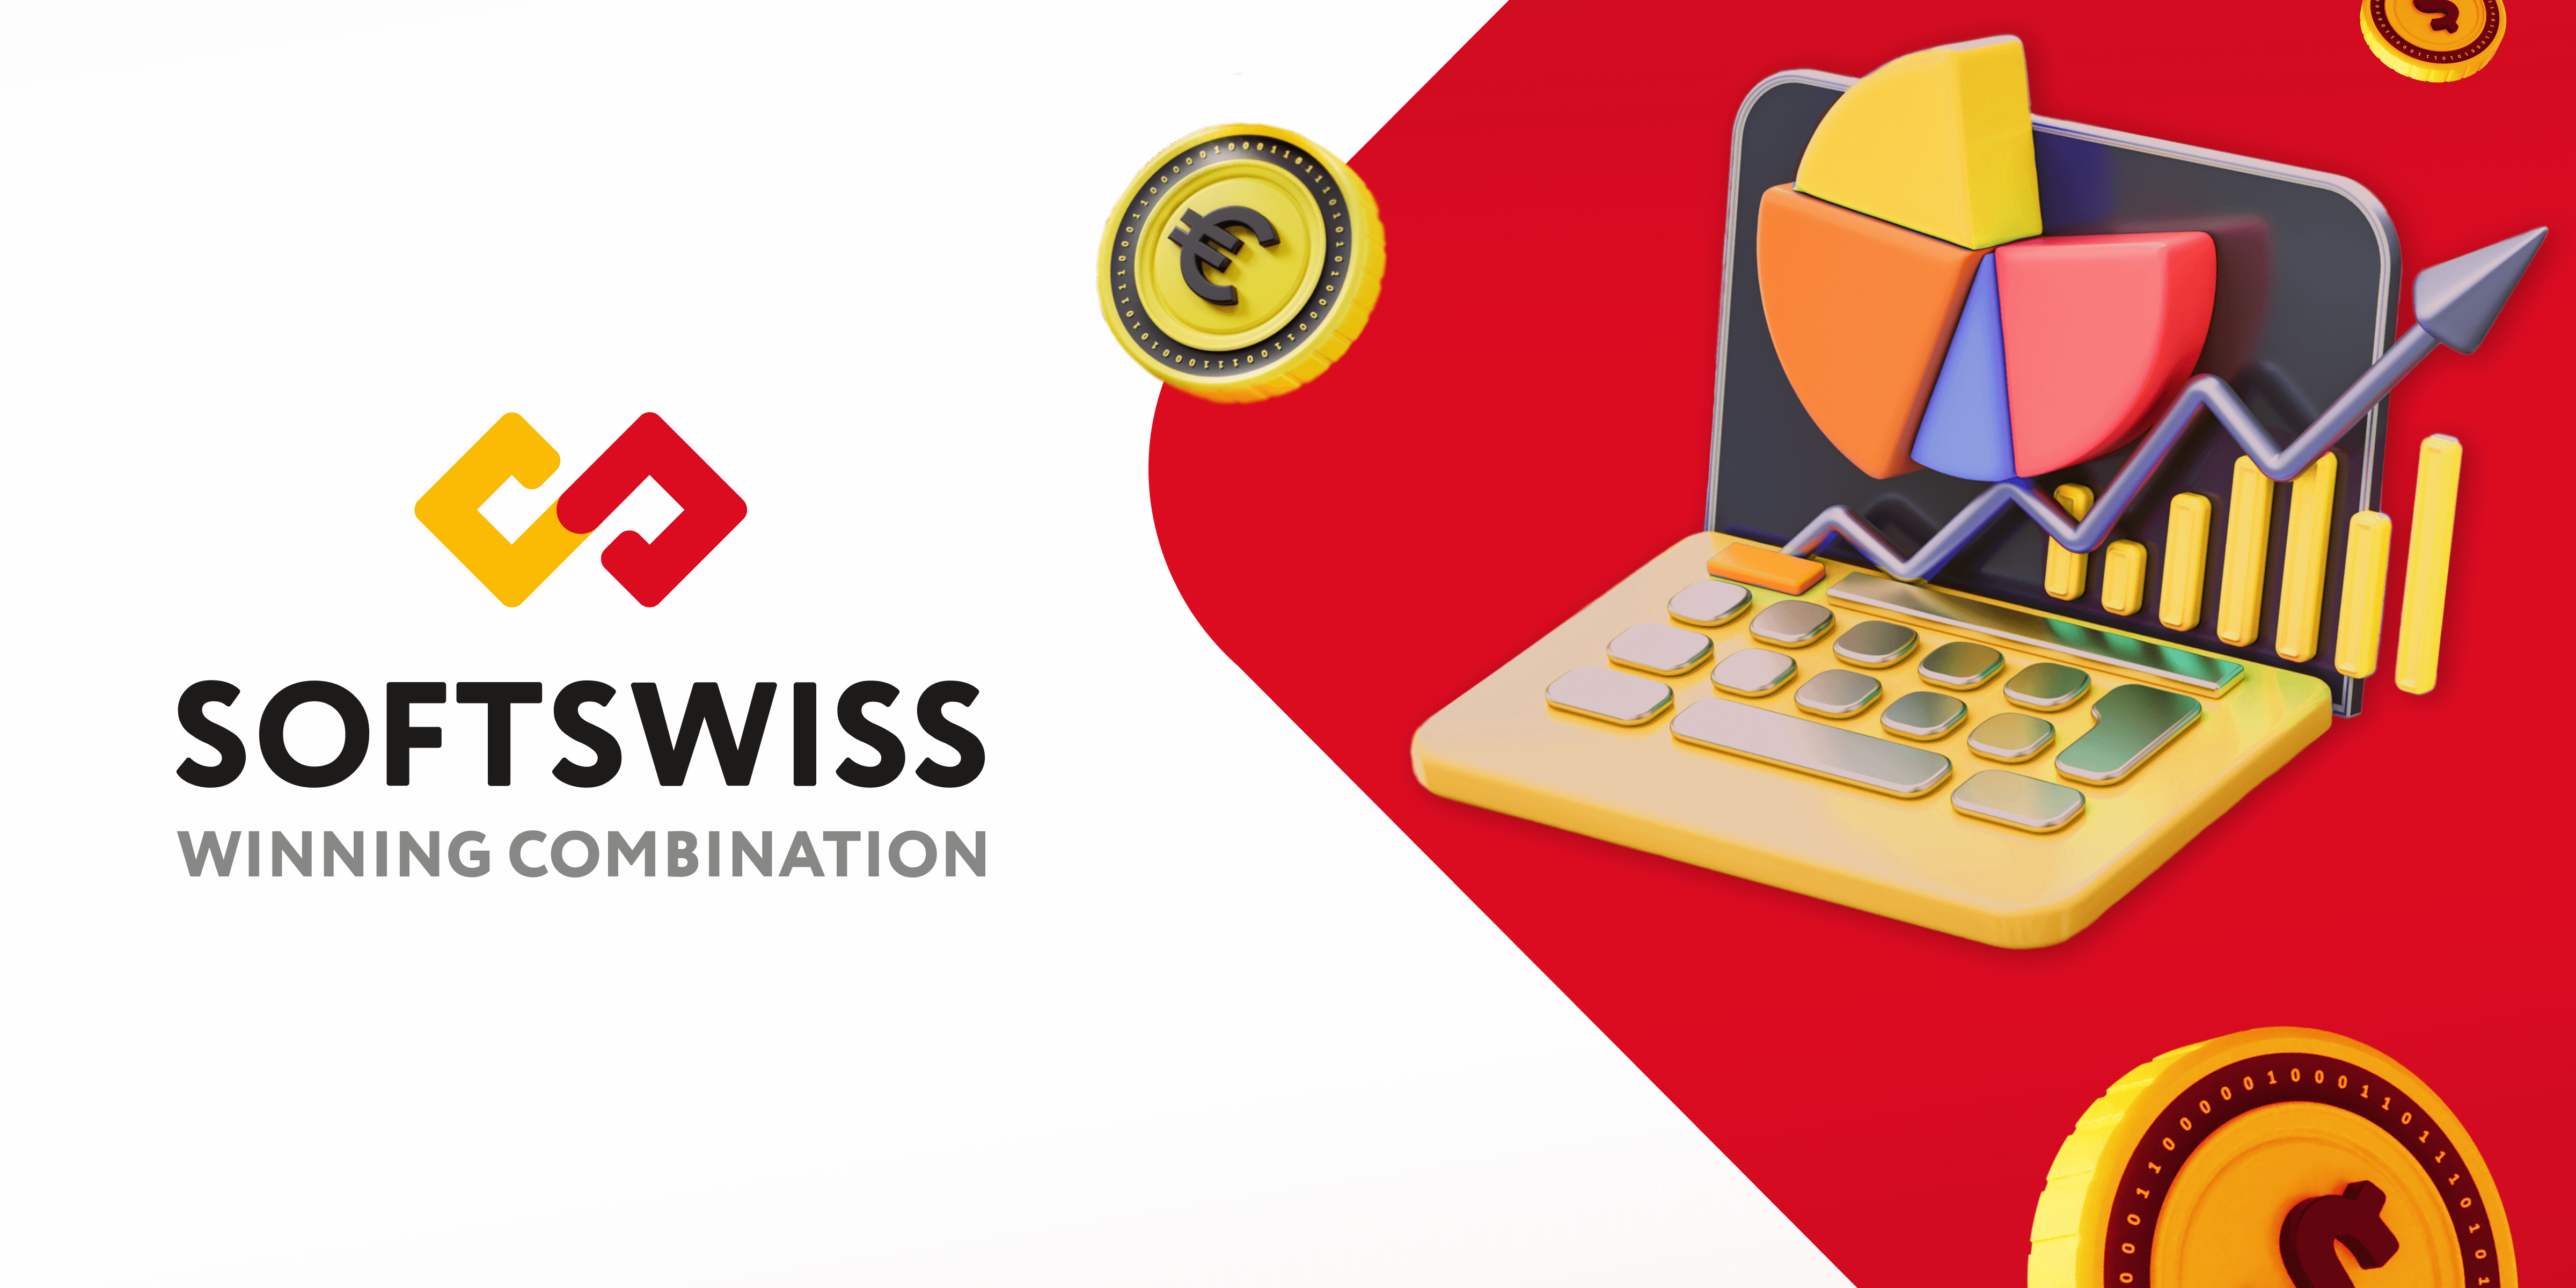 SOFTSWISS Publishes Free Online Casino Budget Calculator